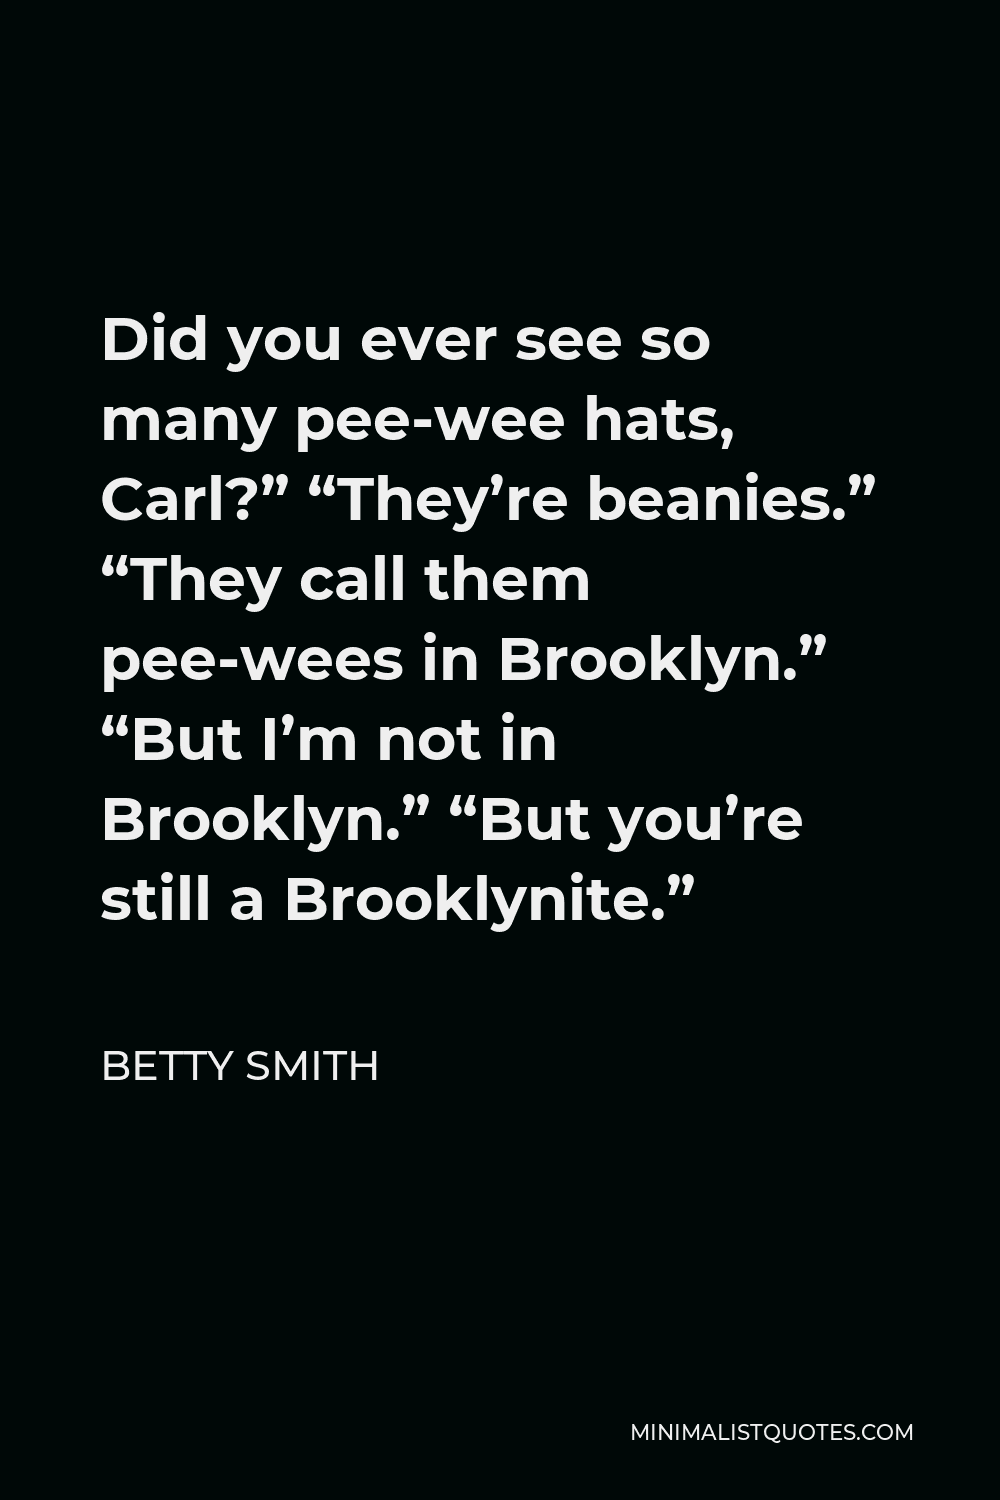 Betty Smith Quote - Did you ever see so many pee-wee hats, Carl?” “They’re beanies.” “They call them pee-wees in Brooklyn.” “But I’m not in Brooklyn.” “But you’re still a Brooklynite.”